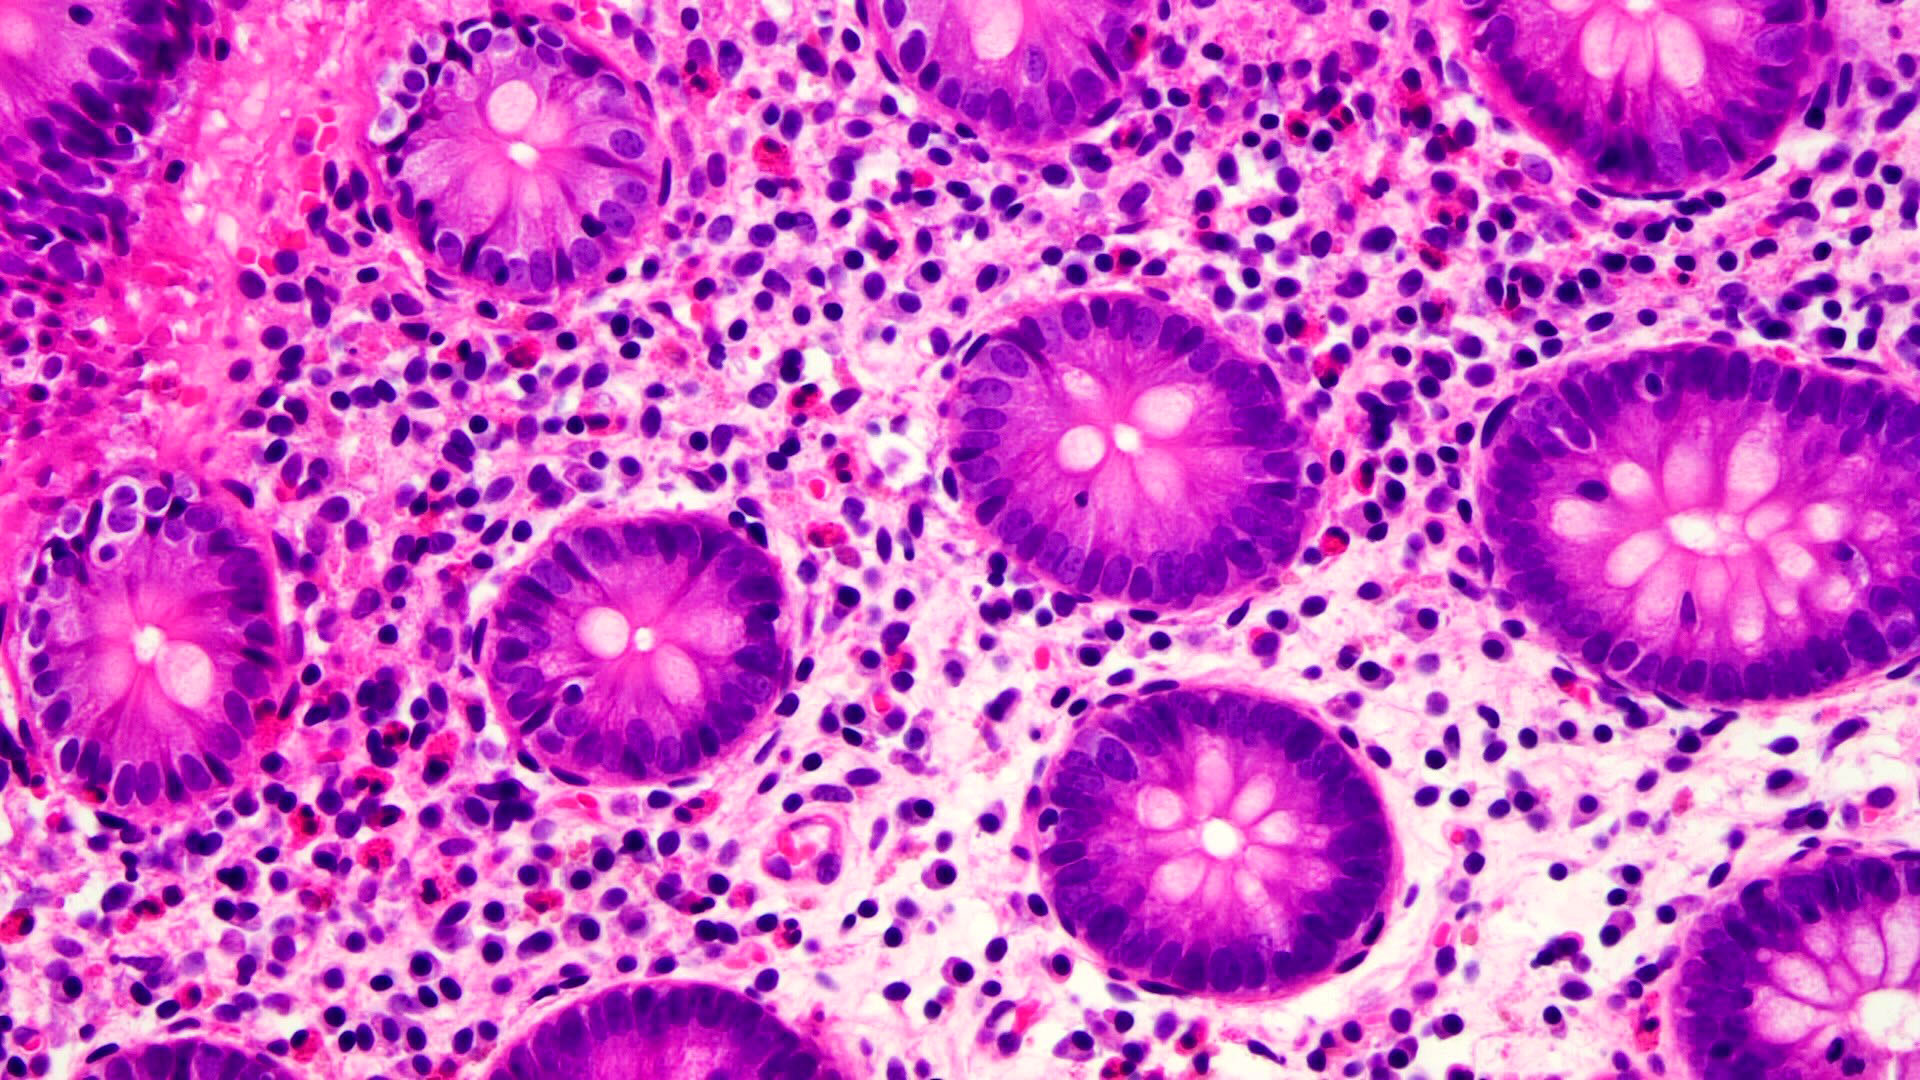 Eosinophils in the infiltrate